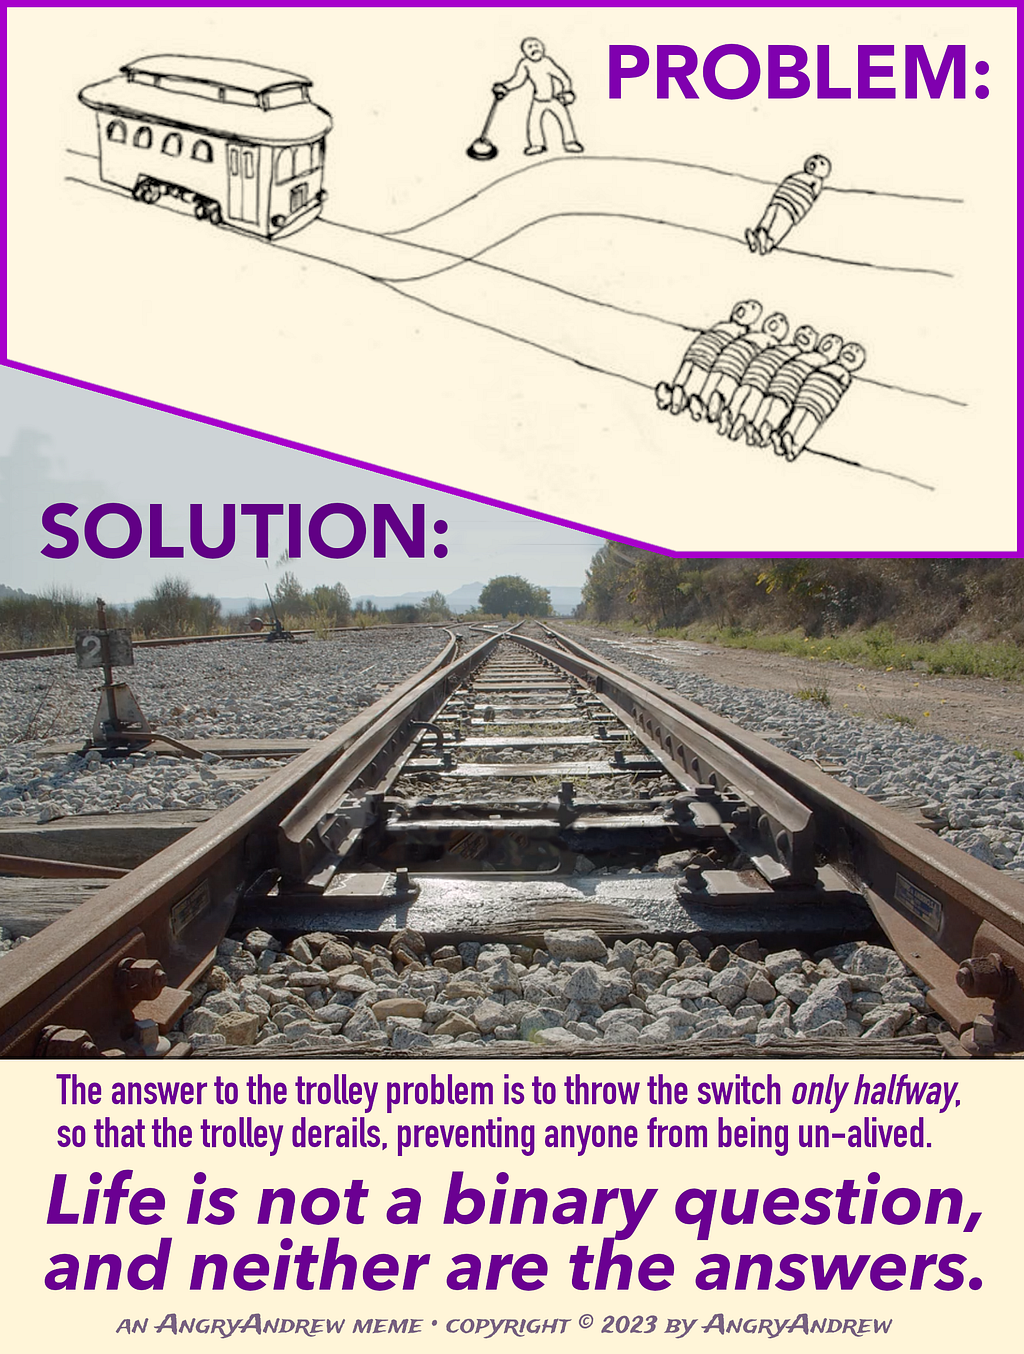 The top portion of this meme shows the classic trolley problem with a guy in a conundrum to throw the switch which will cause the trolley to un-alive one person instead of four people, as if that were the only choice. Below that shows a railroad switch in the halfway position, and then below that is the following text: The answer to the trolley problem is to throw the switch only halfway, so that the trolley derails preventing anyone from being un-alived. Life is not binary, and neither are the